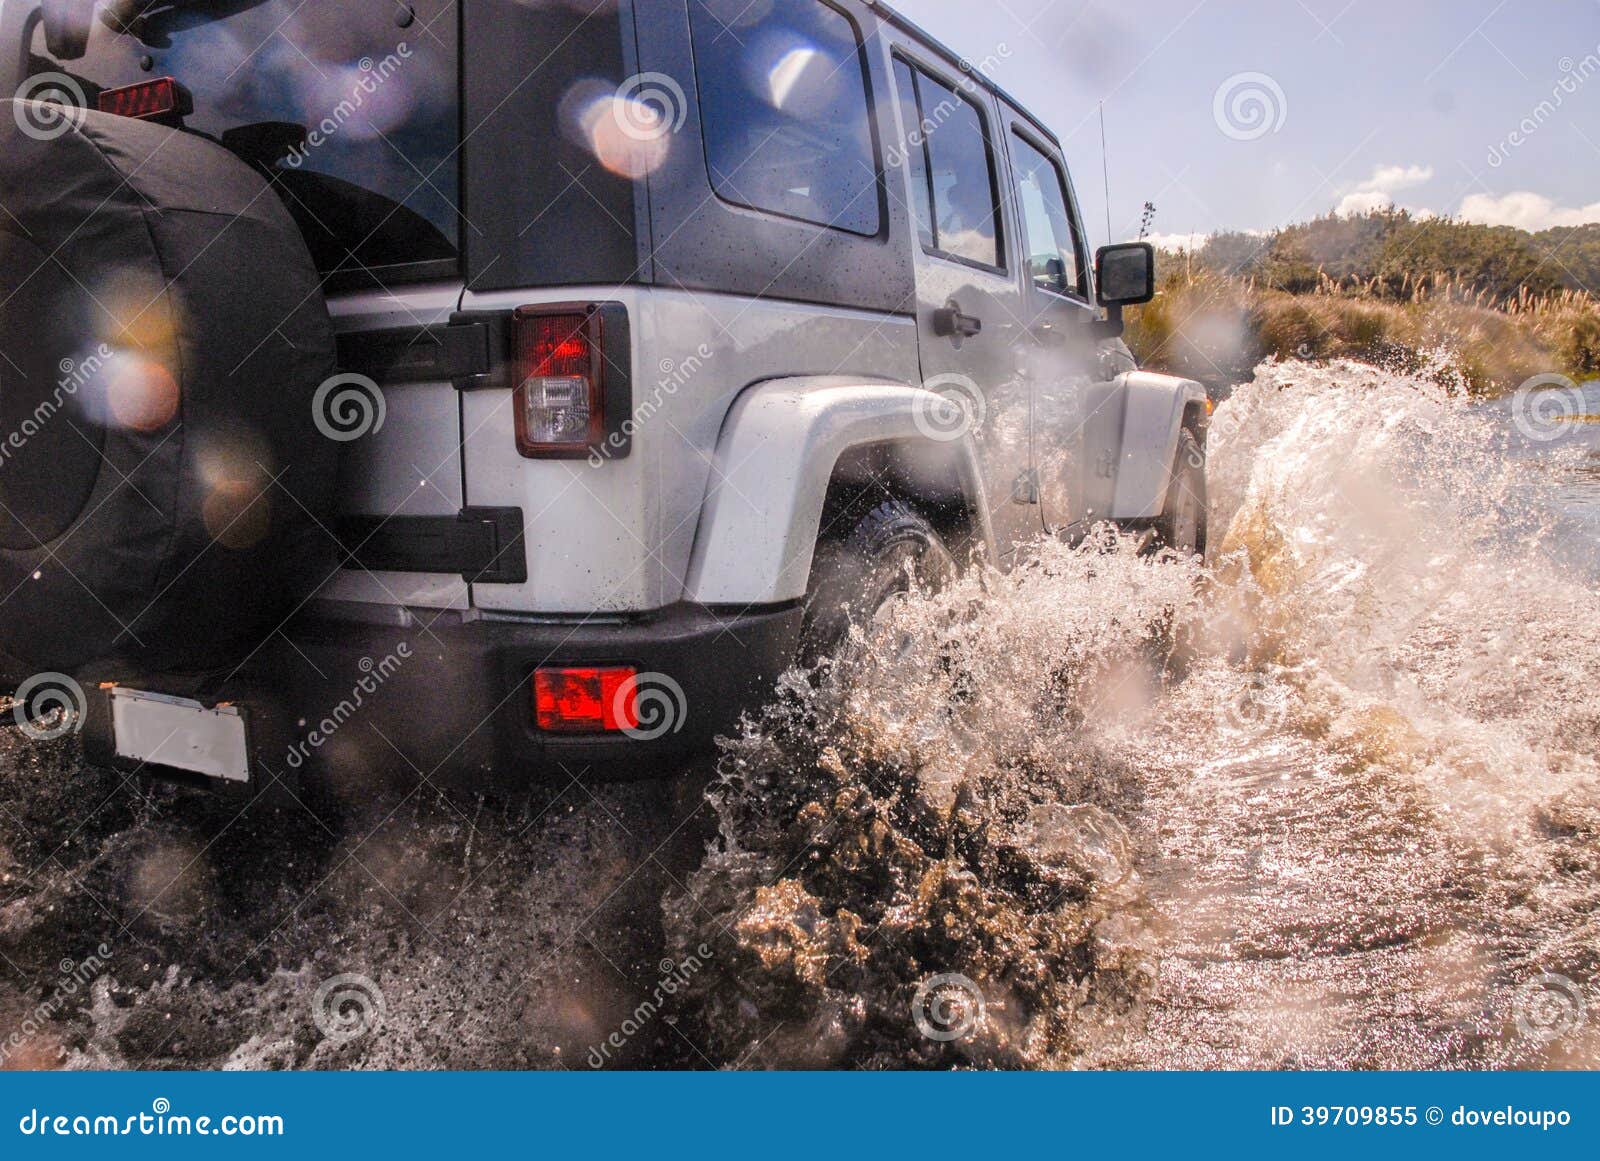 new 4wd fording river